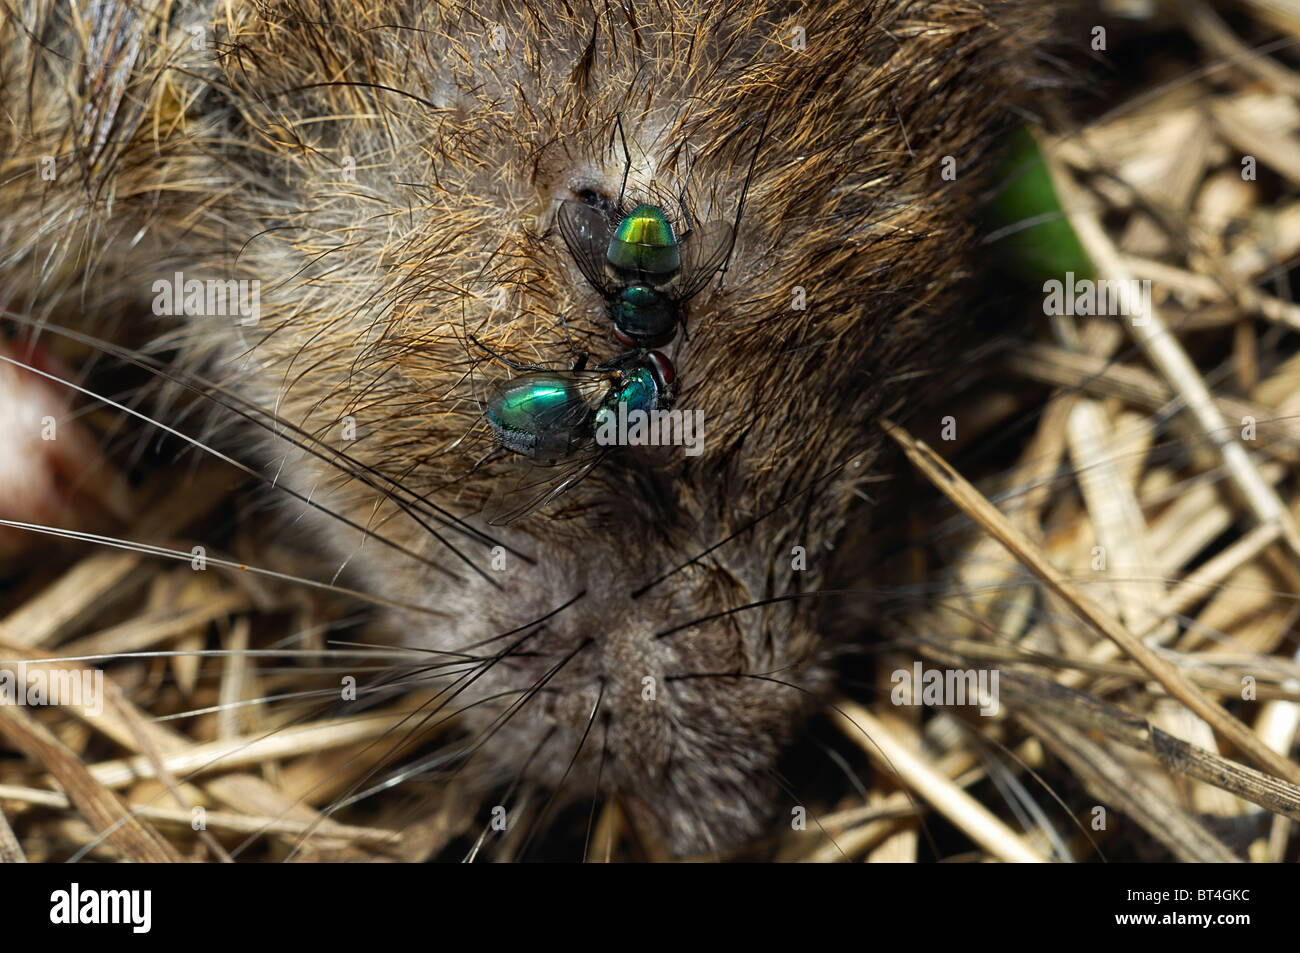 Green Bottles attack eye of Common Rat carcass, close-up Stock Photo